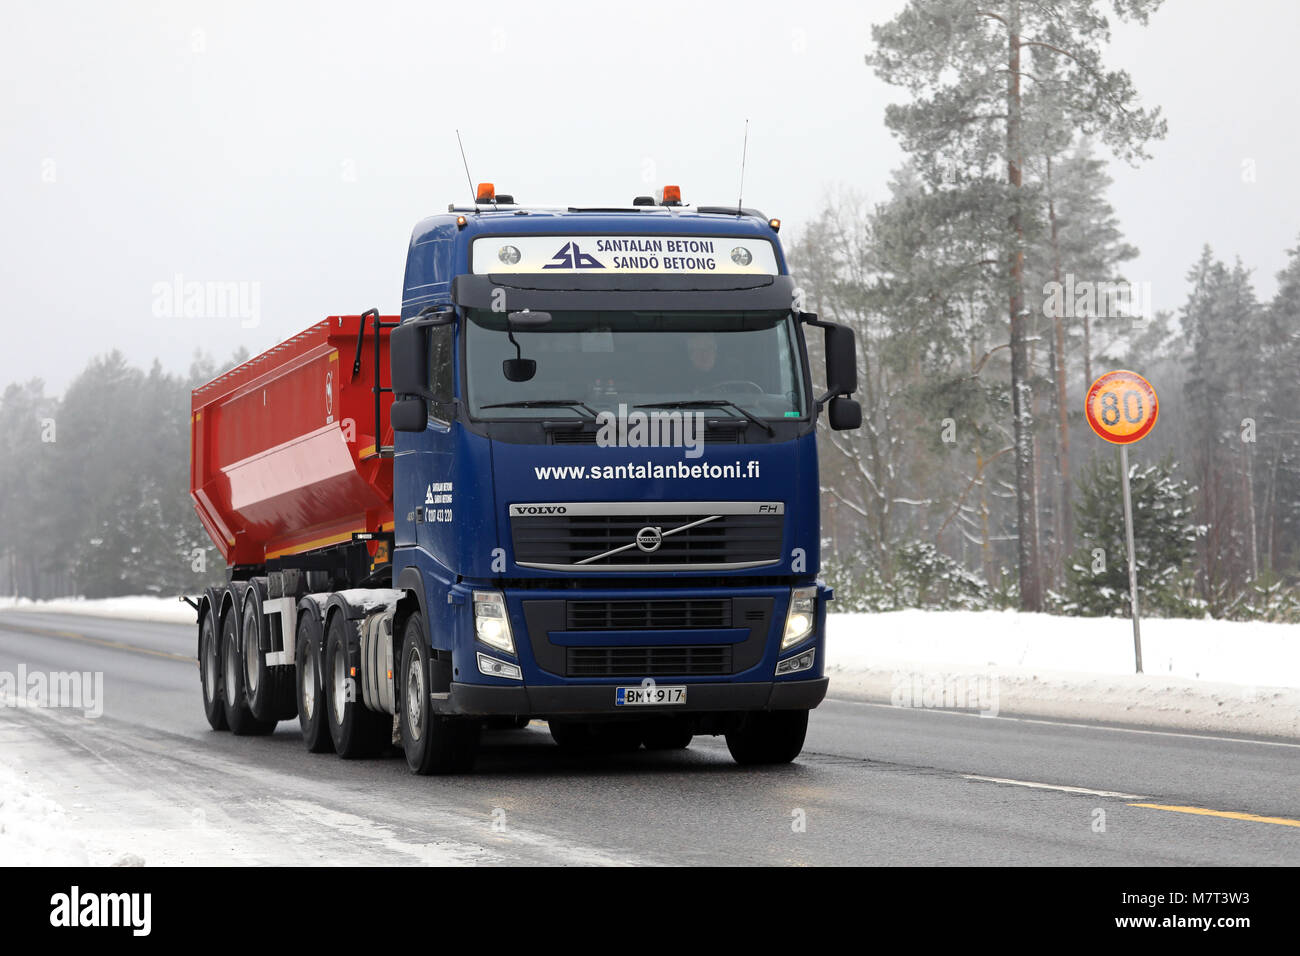 RAASEPORI, FINLAND - FEBRUARY 9, 2018: Blue Volvo FH tipper truck of Santalan Betoni Oy moves along highway in winter snowfall in South of Finland. Stock Photo